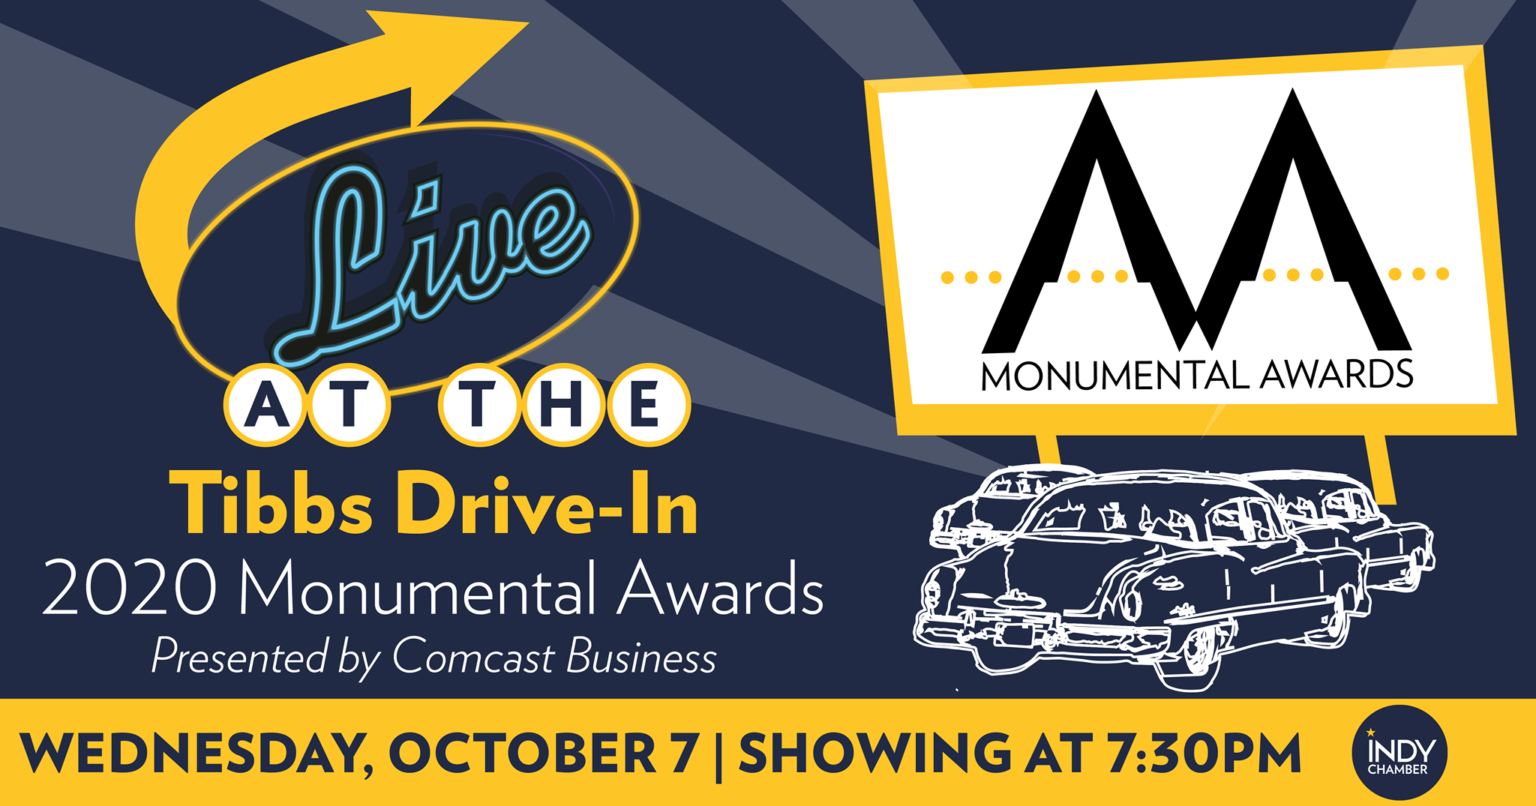 Indy Chamber’s 43rd Annual Monumental Awards IndyHub